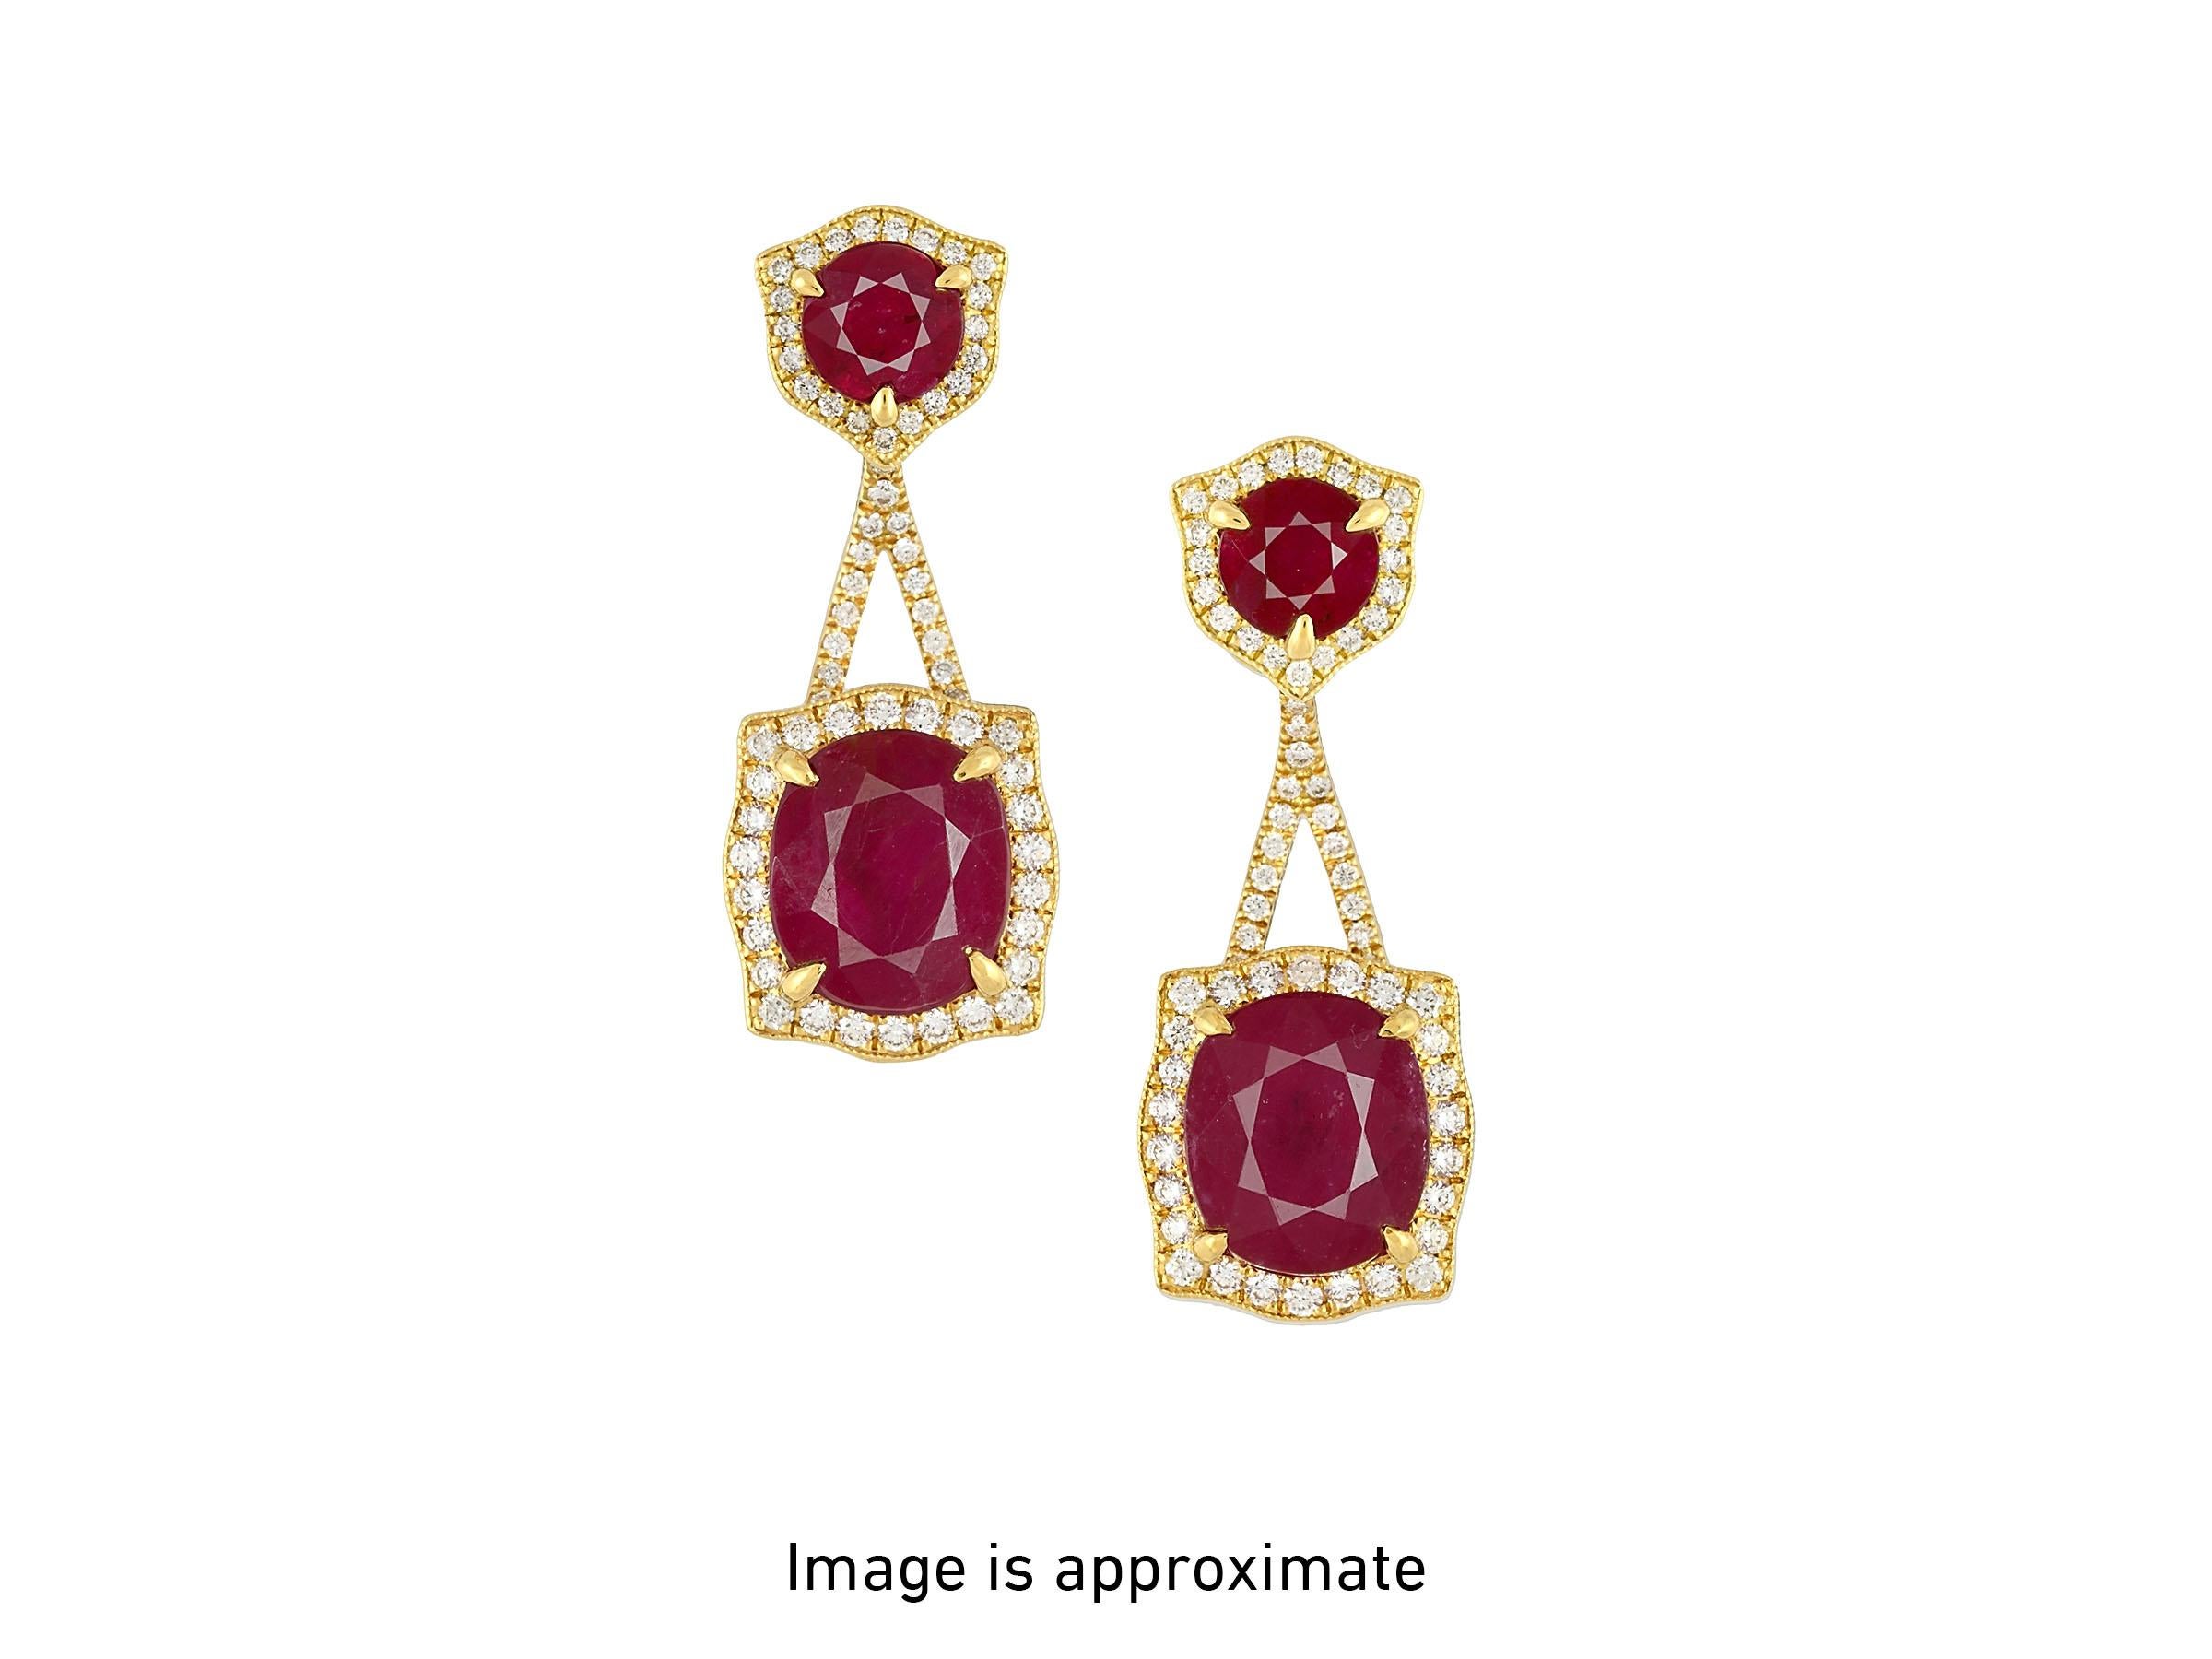 Modern Mozambique Ruby Earrings. 13.22 carats, GIA certified. For Sale